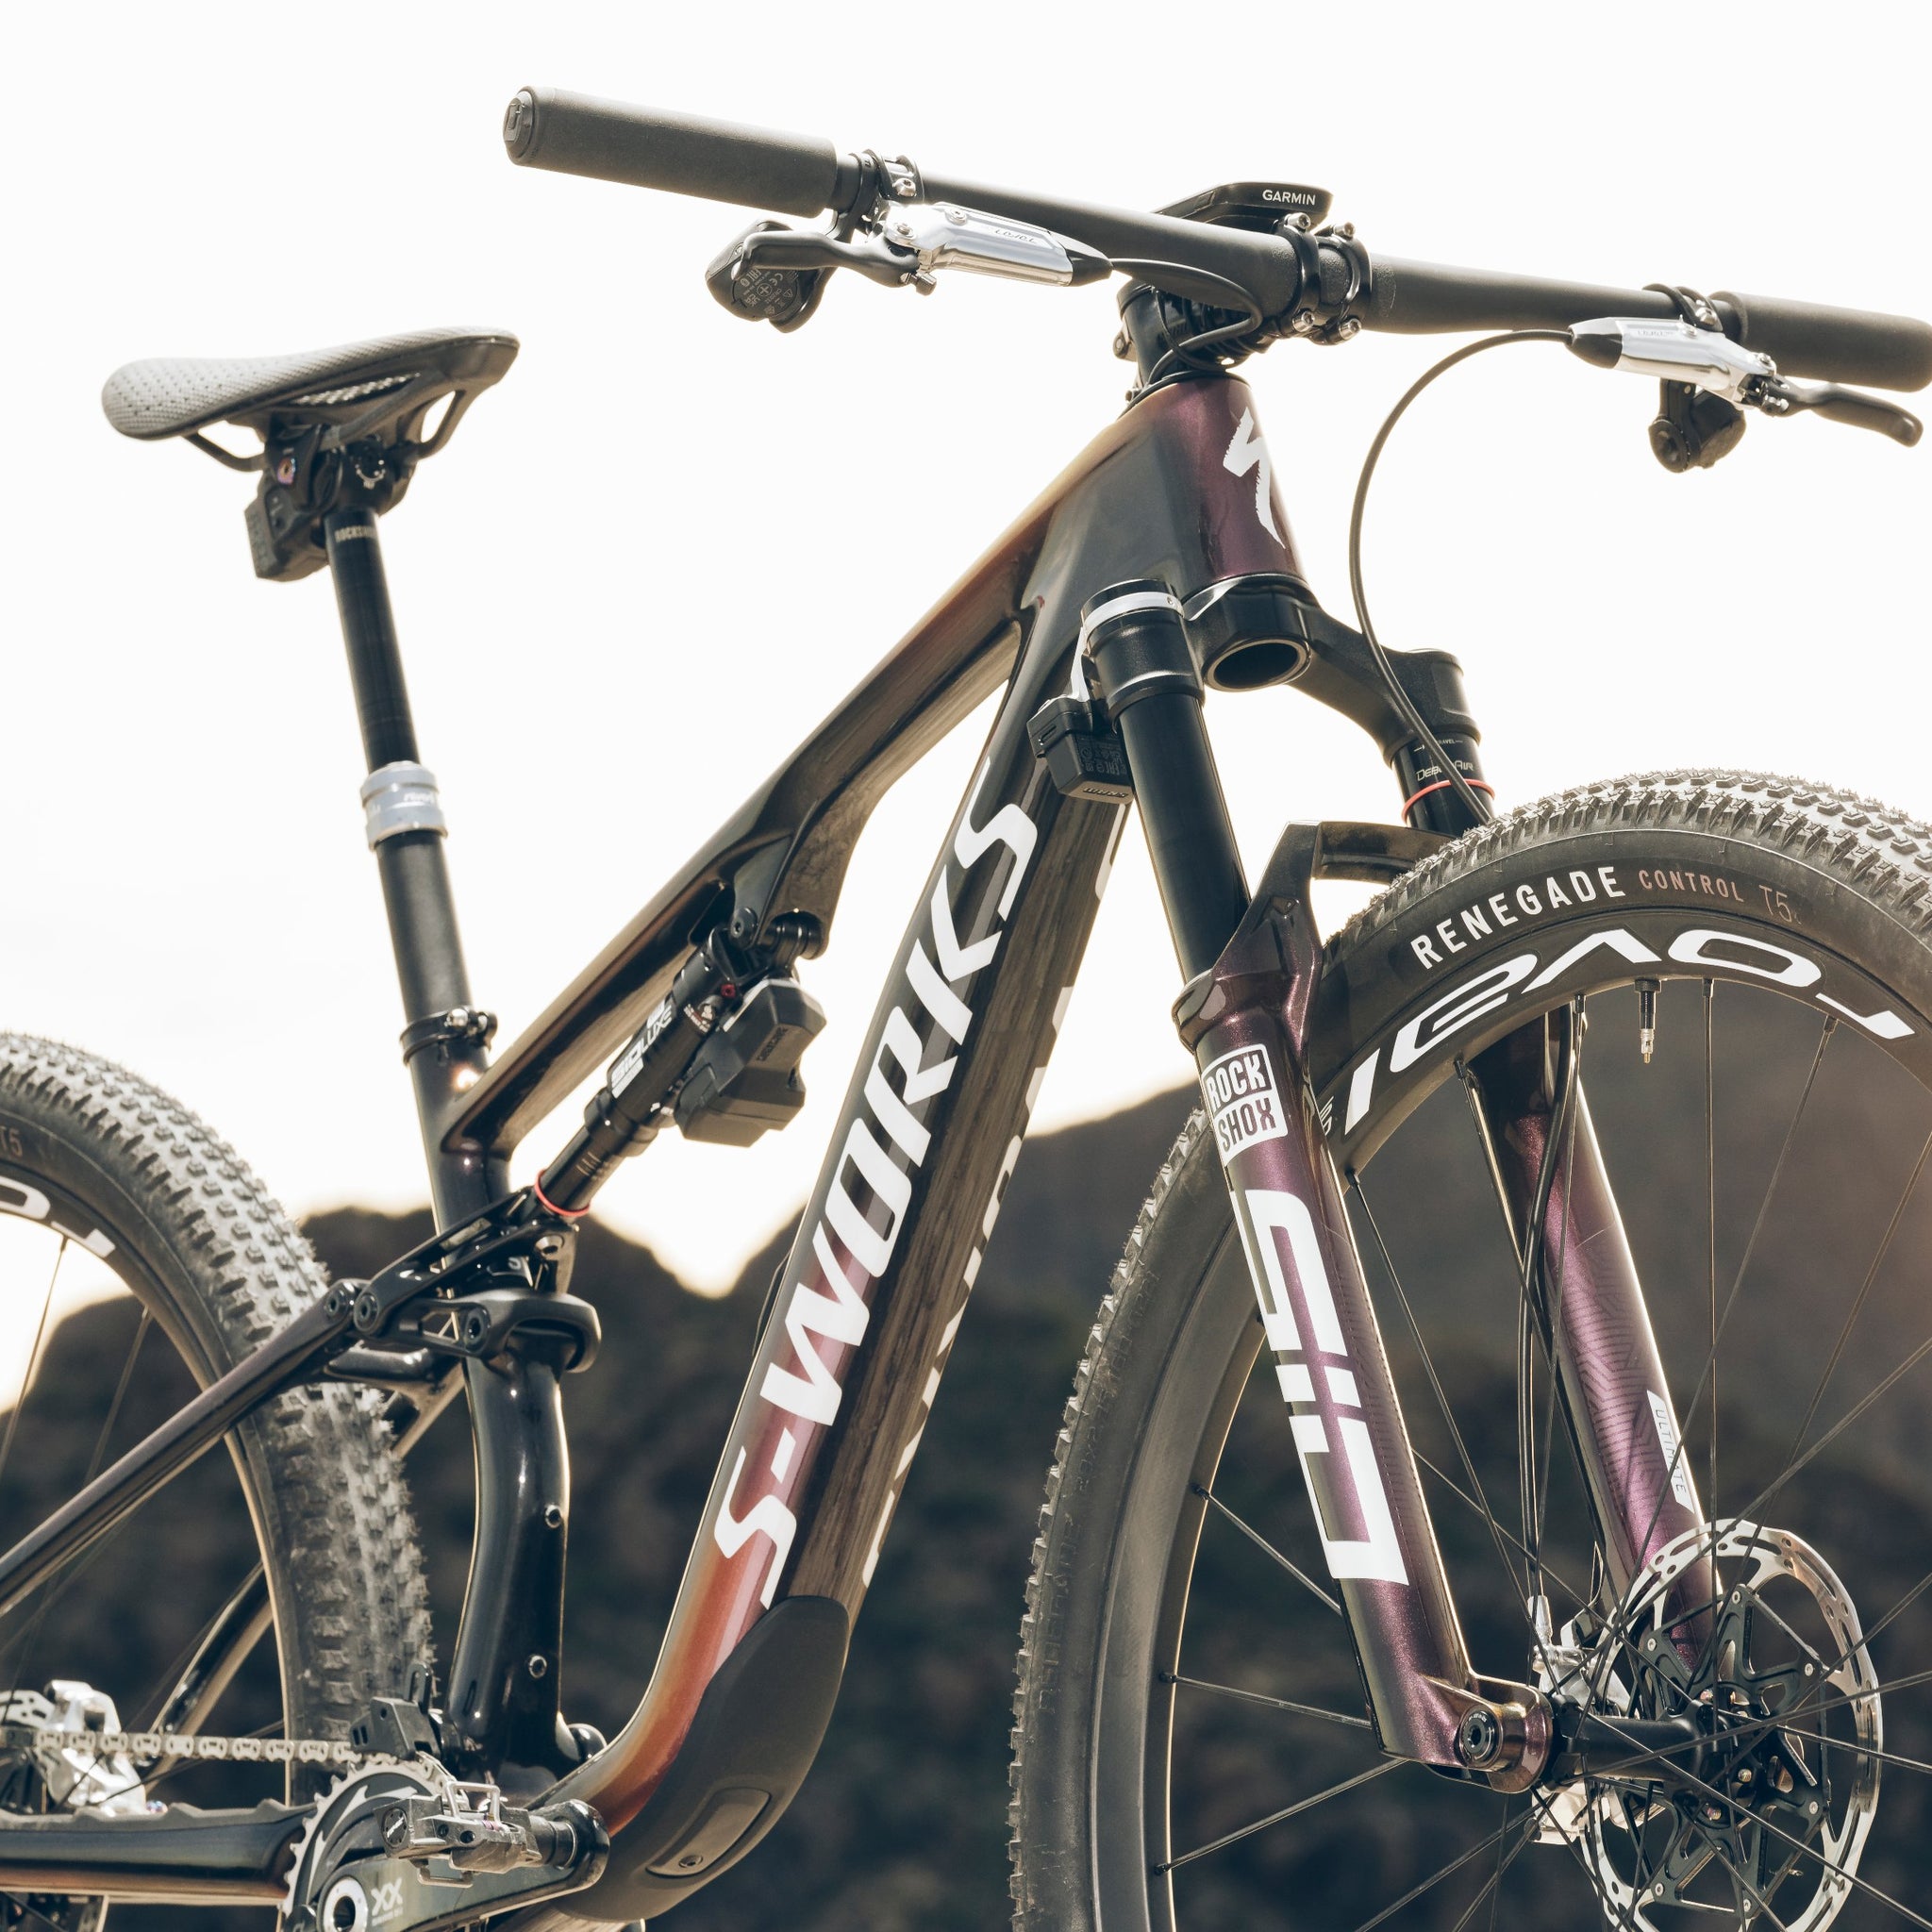 RockShox Flight Attendant: Will XC Welcome Its New Electronic Overlords?